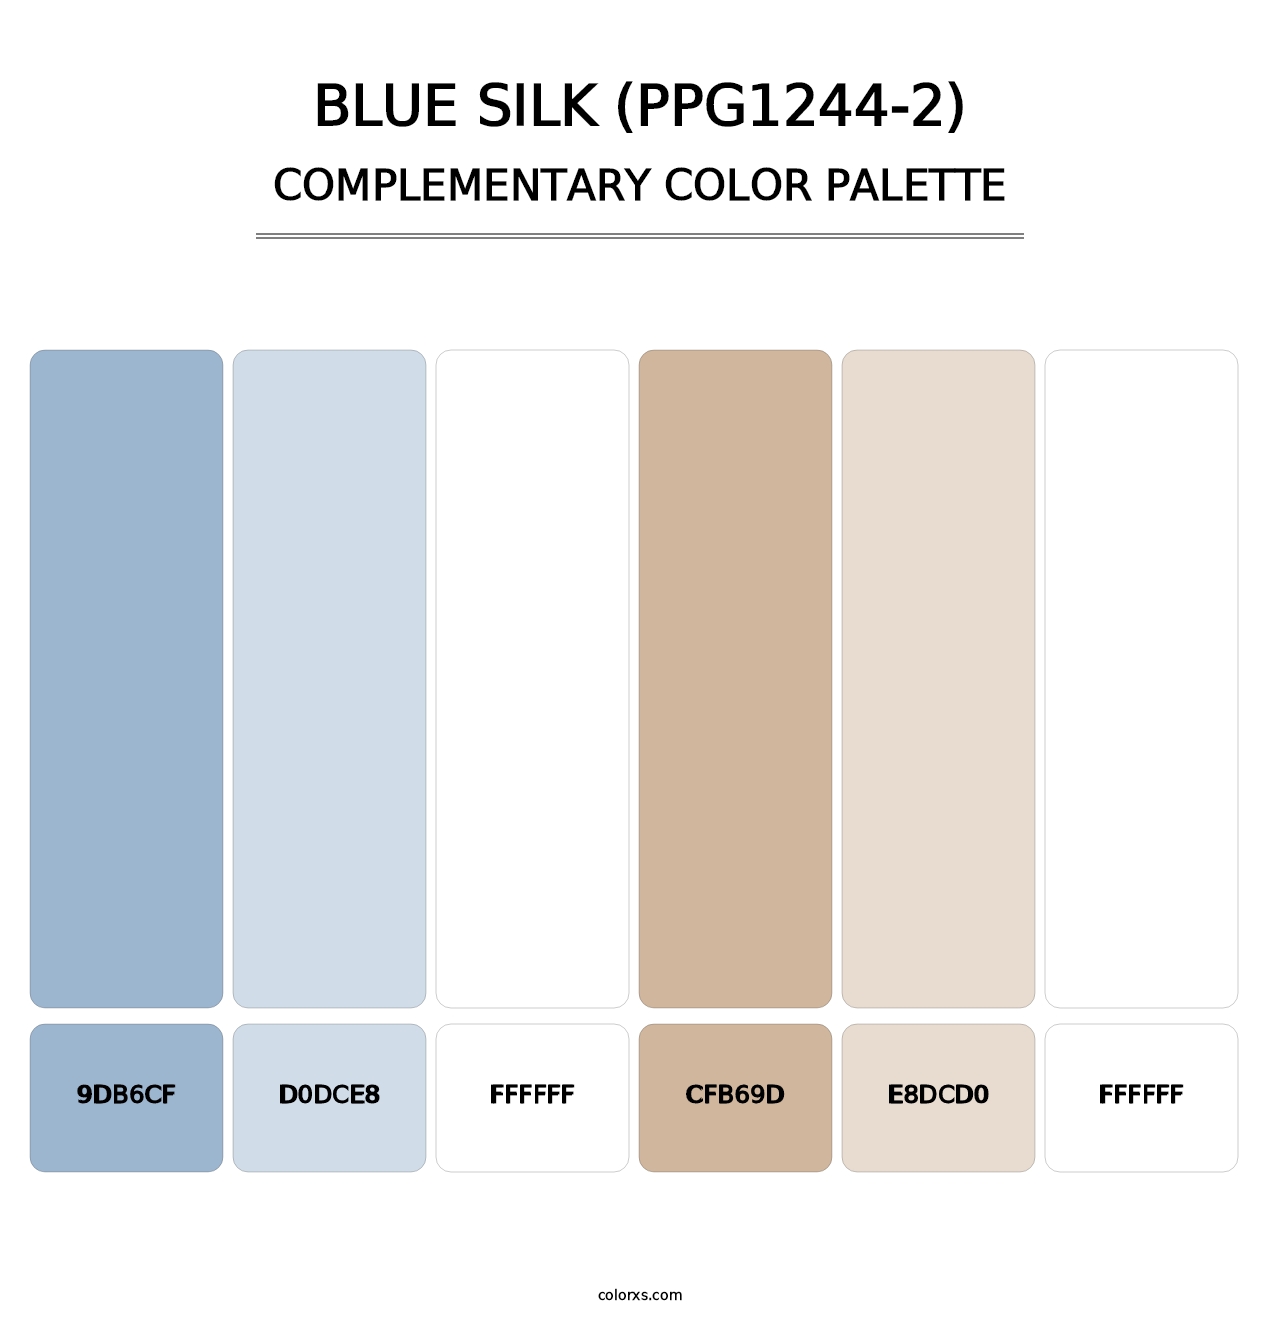 Blue Silk (PPG1244-2) - Complementary Color Palette